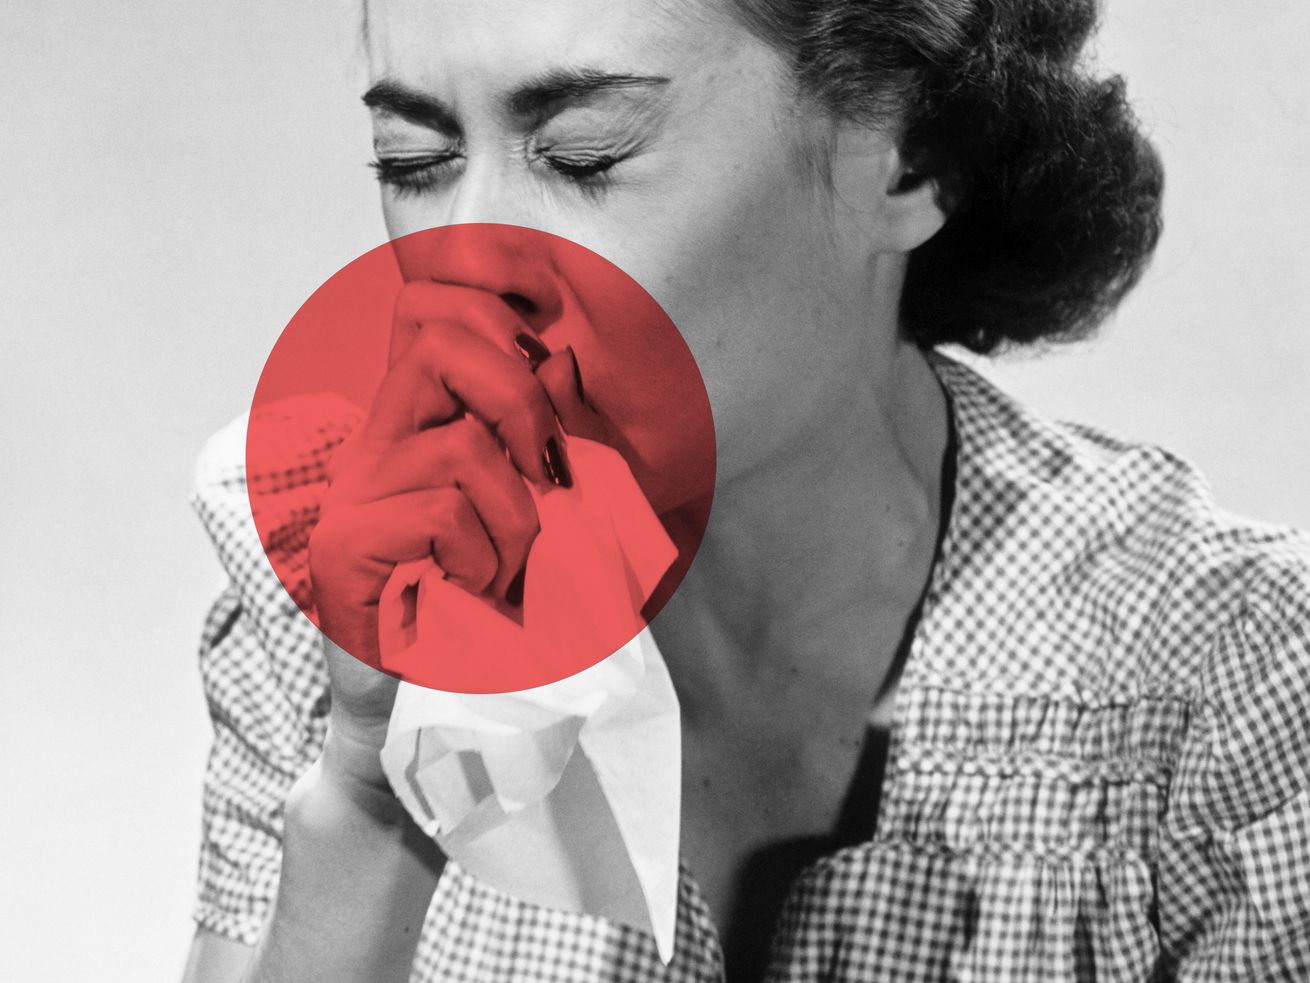 A photo illustration shows a woman from the 1950s sneezing into a handkerchief covering her nose and mouth, with a red circle expanding from the sneeze.